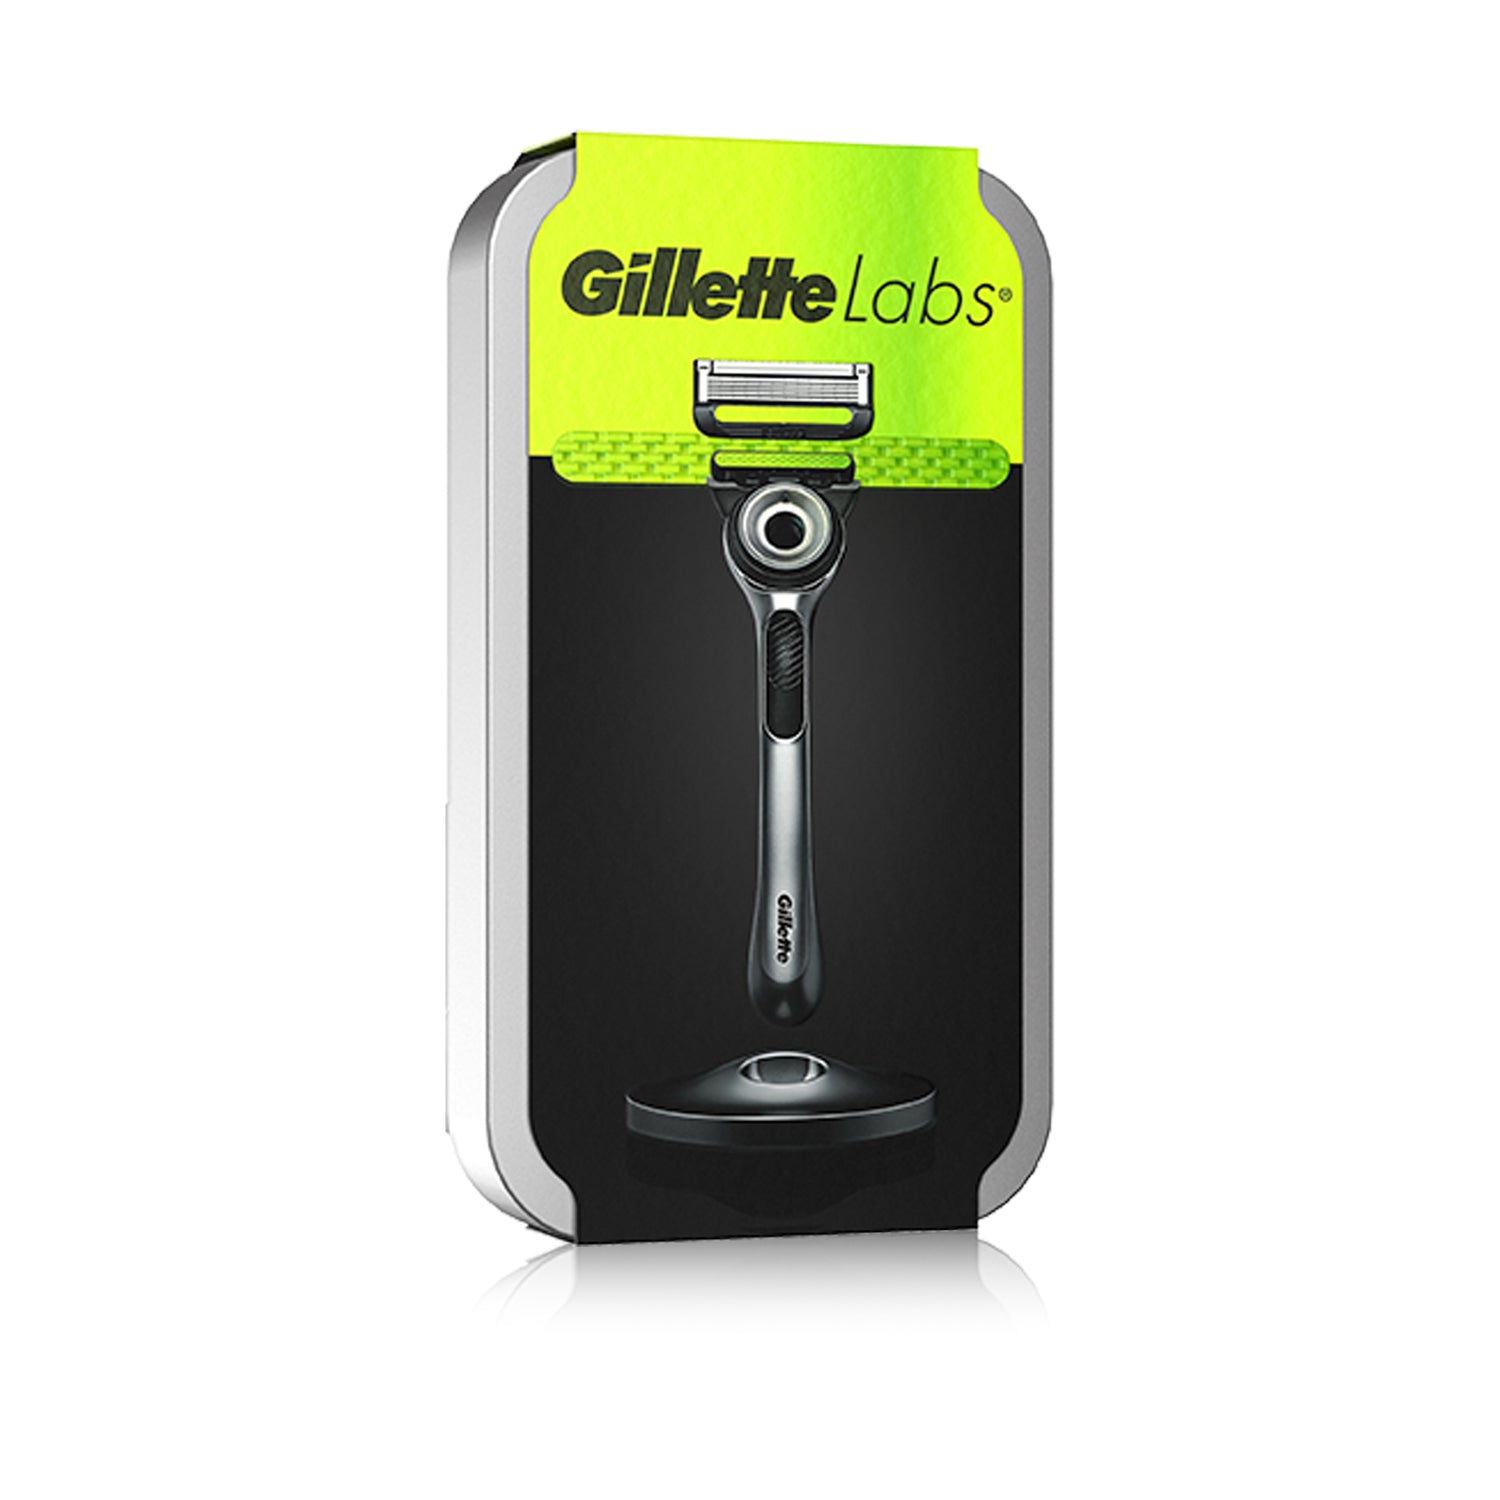 Gillette Labs Shaving Machine With Case